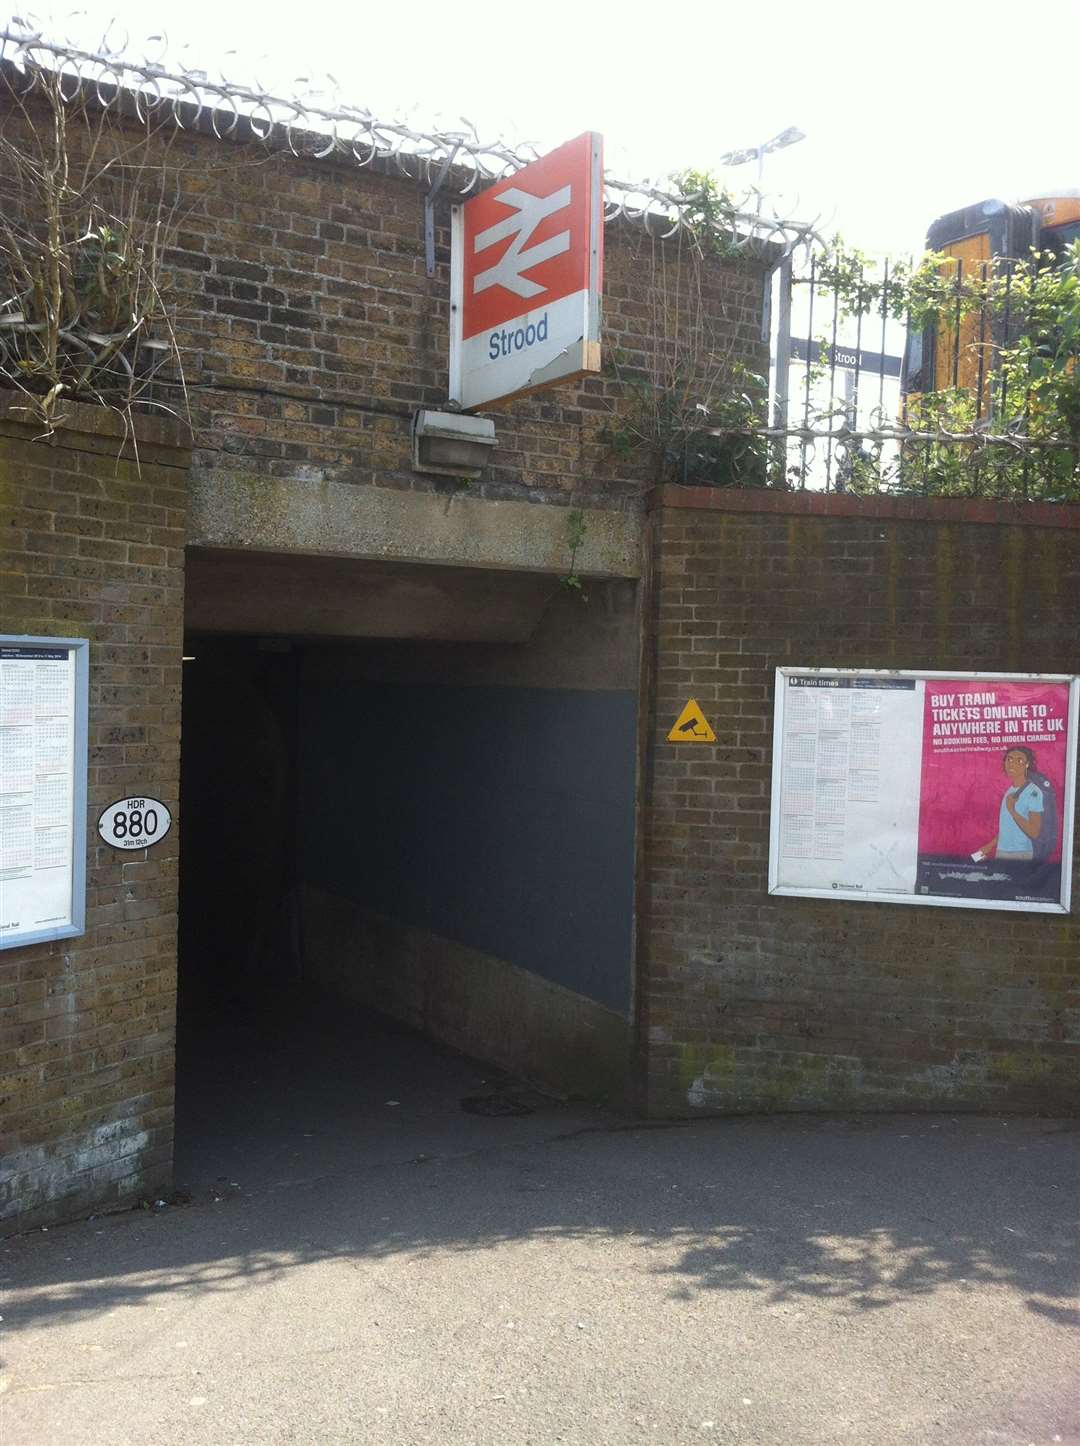 The police officer was robbed in the underpass at Strood Railway Station